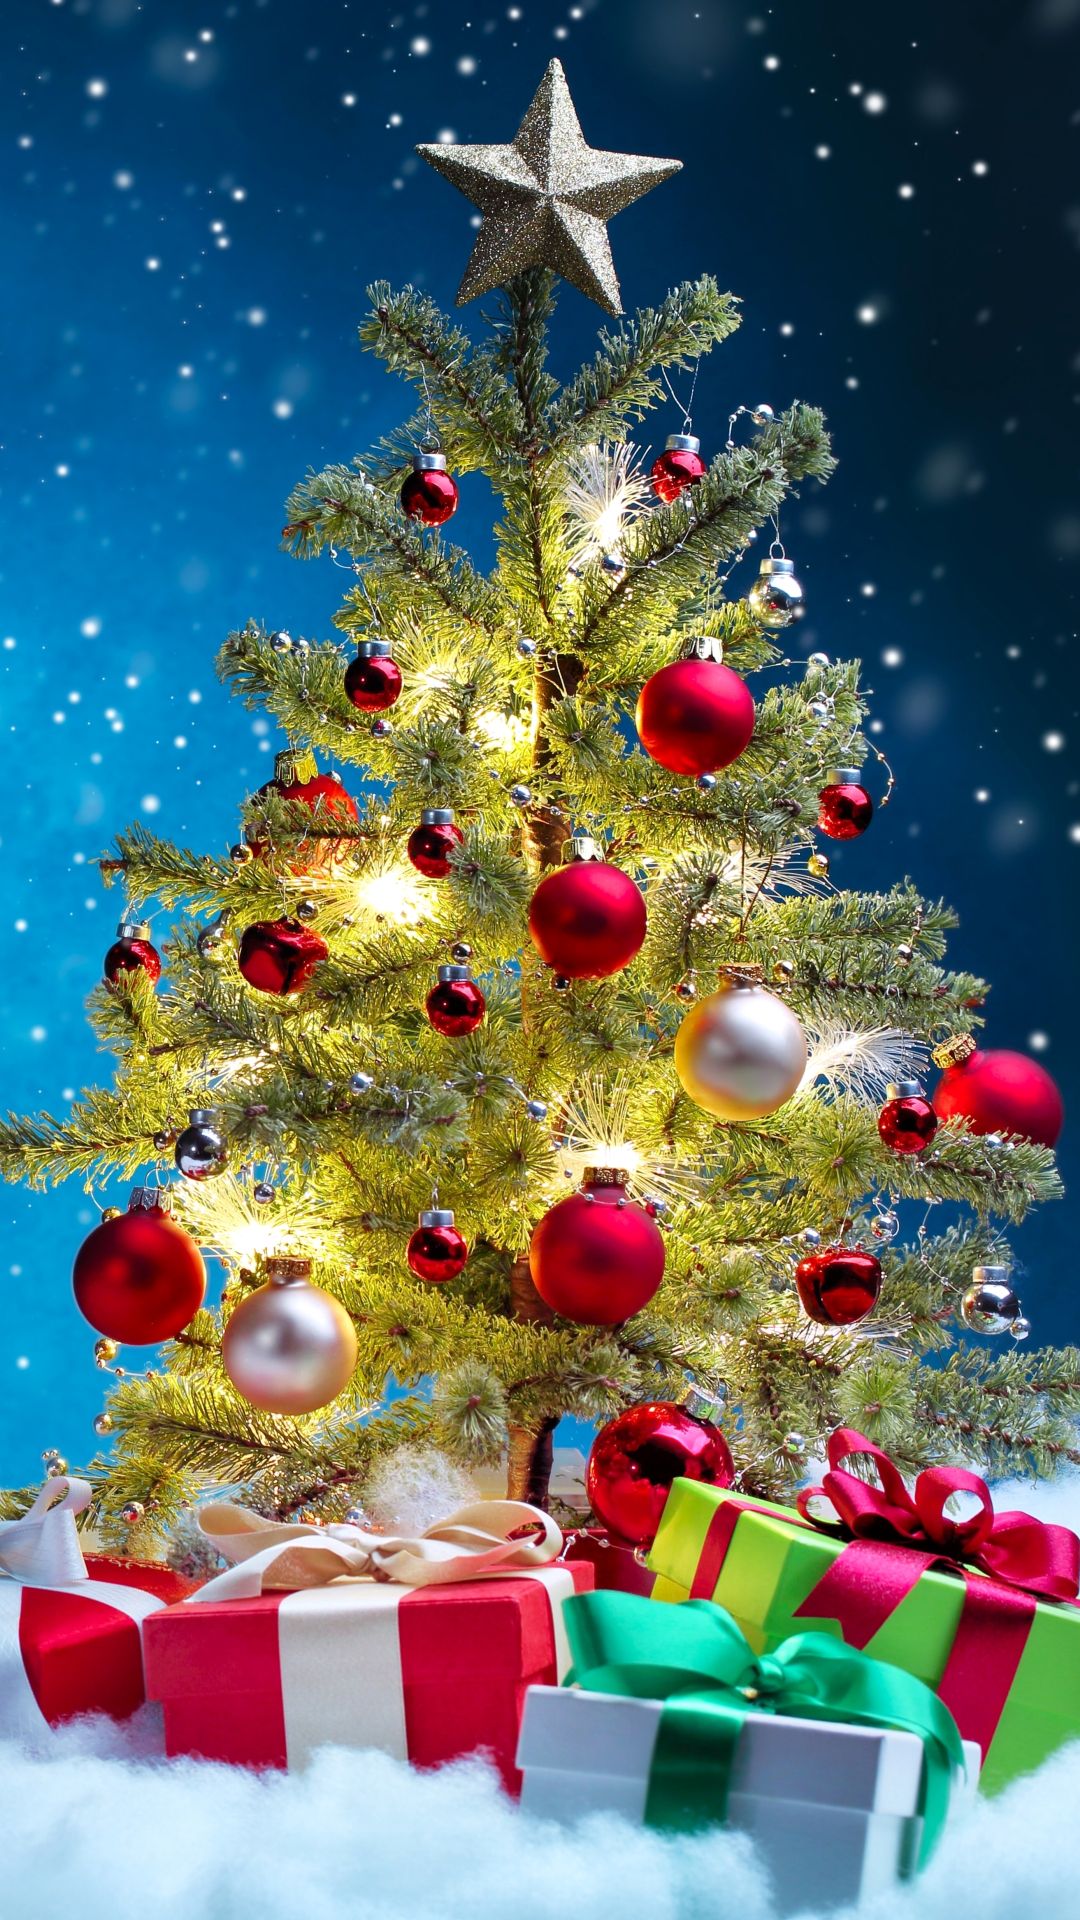 Christmas Full HD Android Wallpapers - Wallpaper Cave